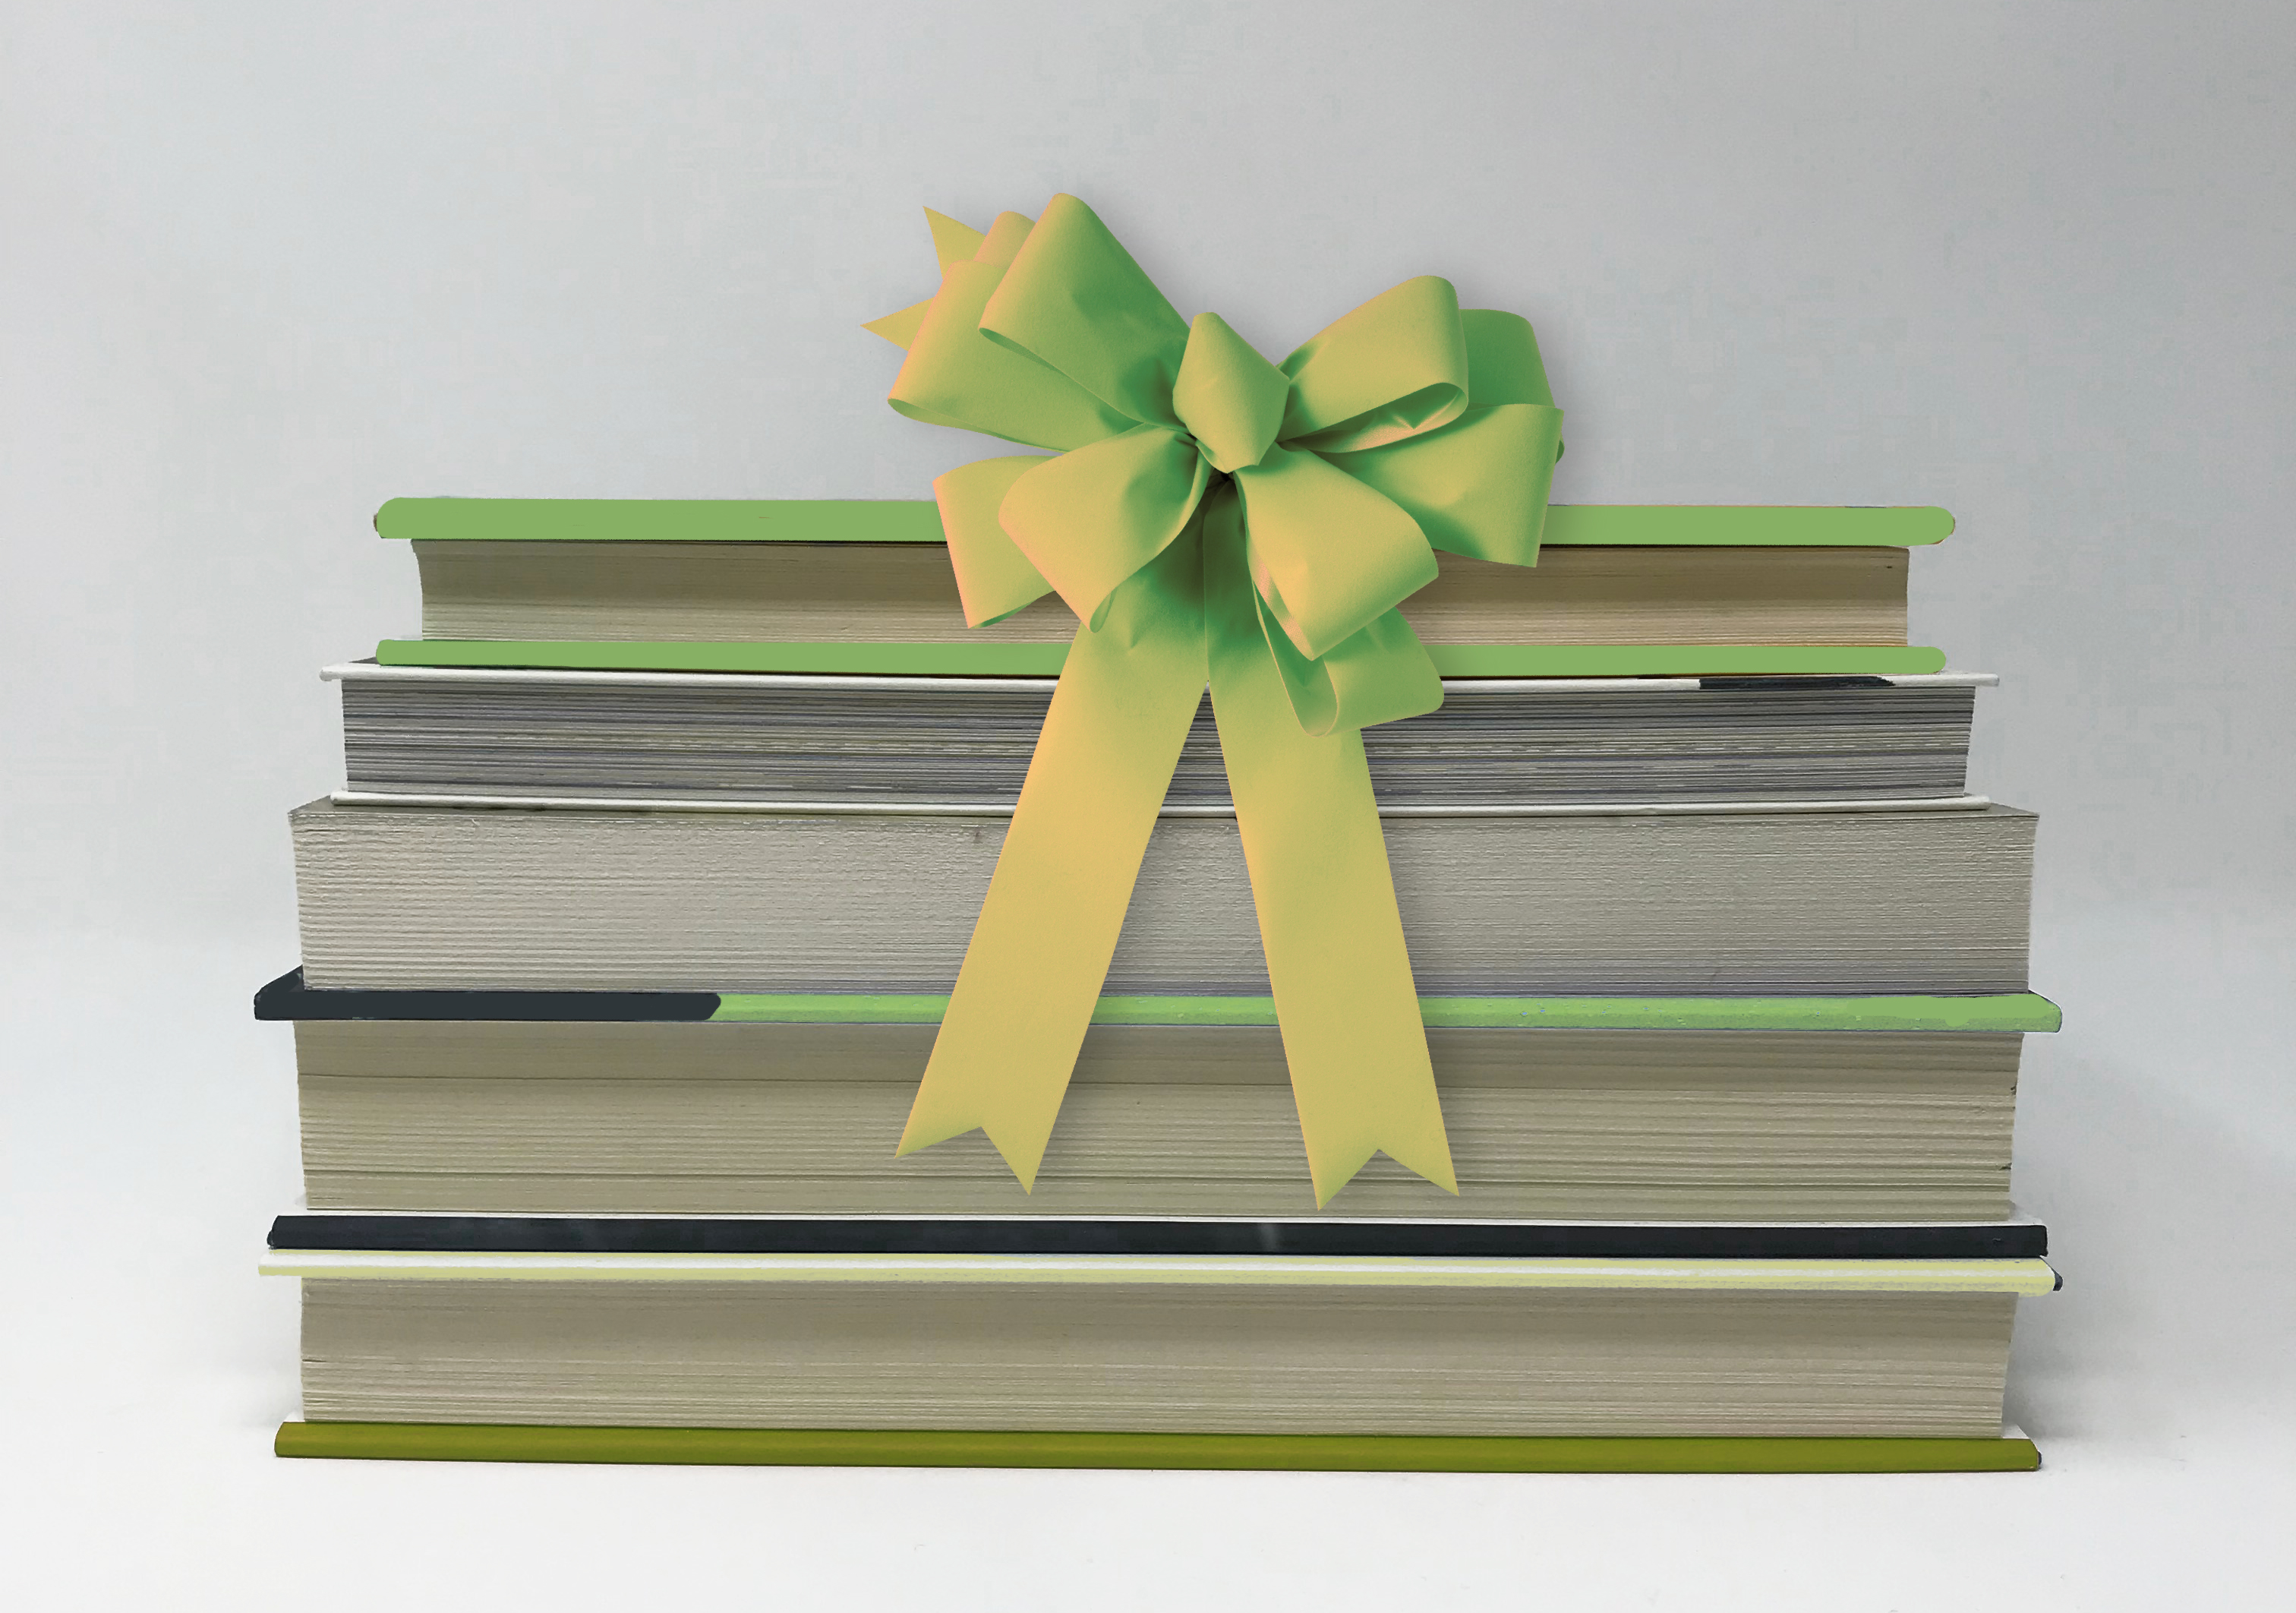 A stack of books tied together with a green and yellow ribbon bow, symbolizing a thoughtful gift for a book lover.